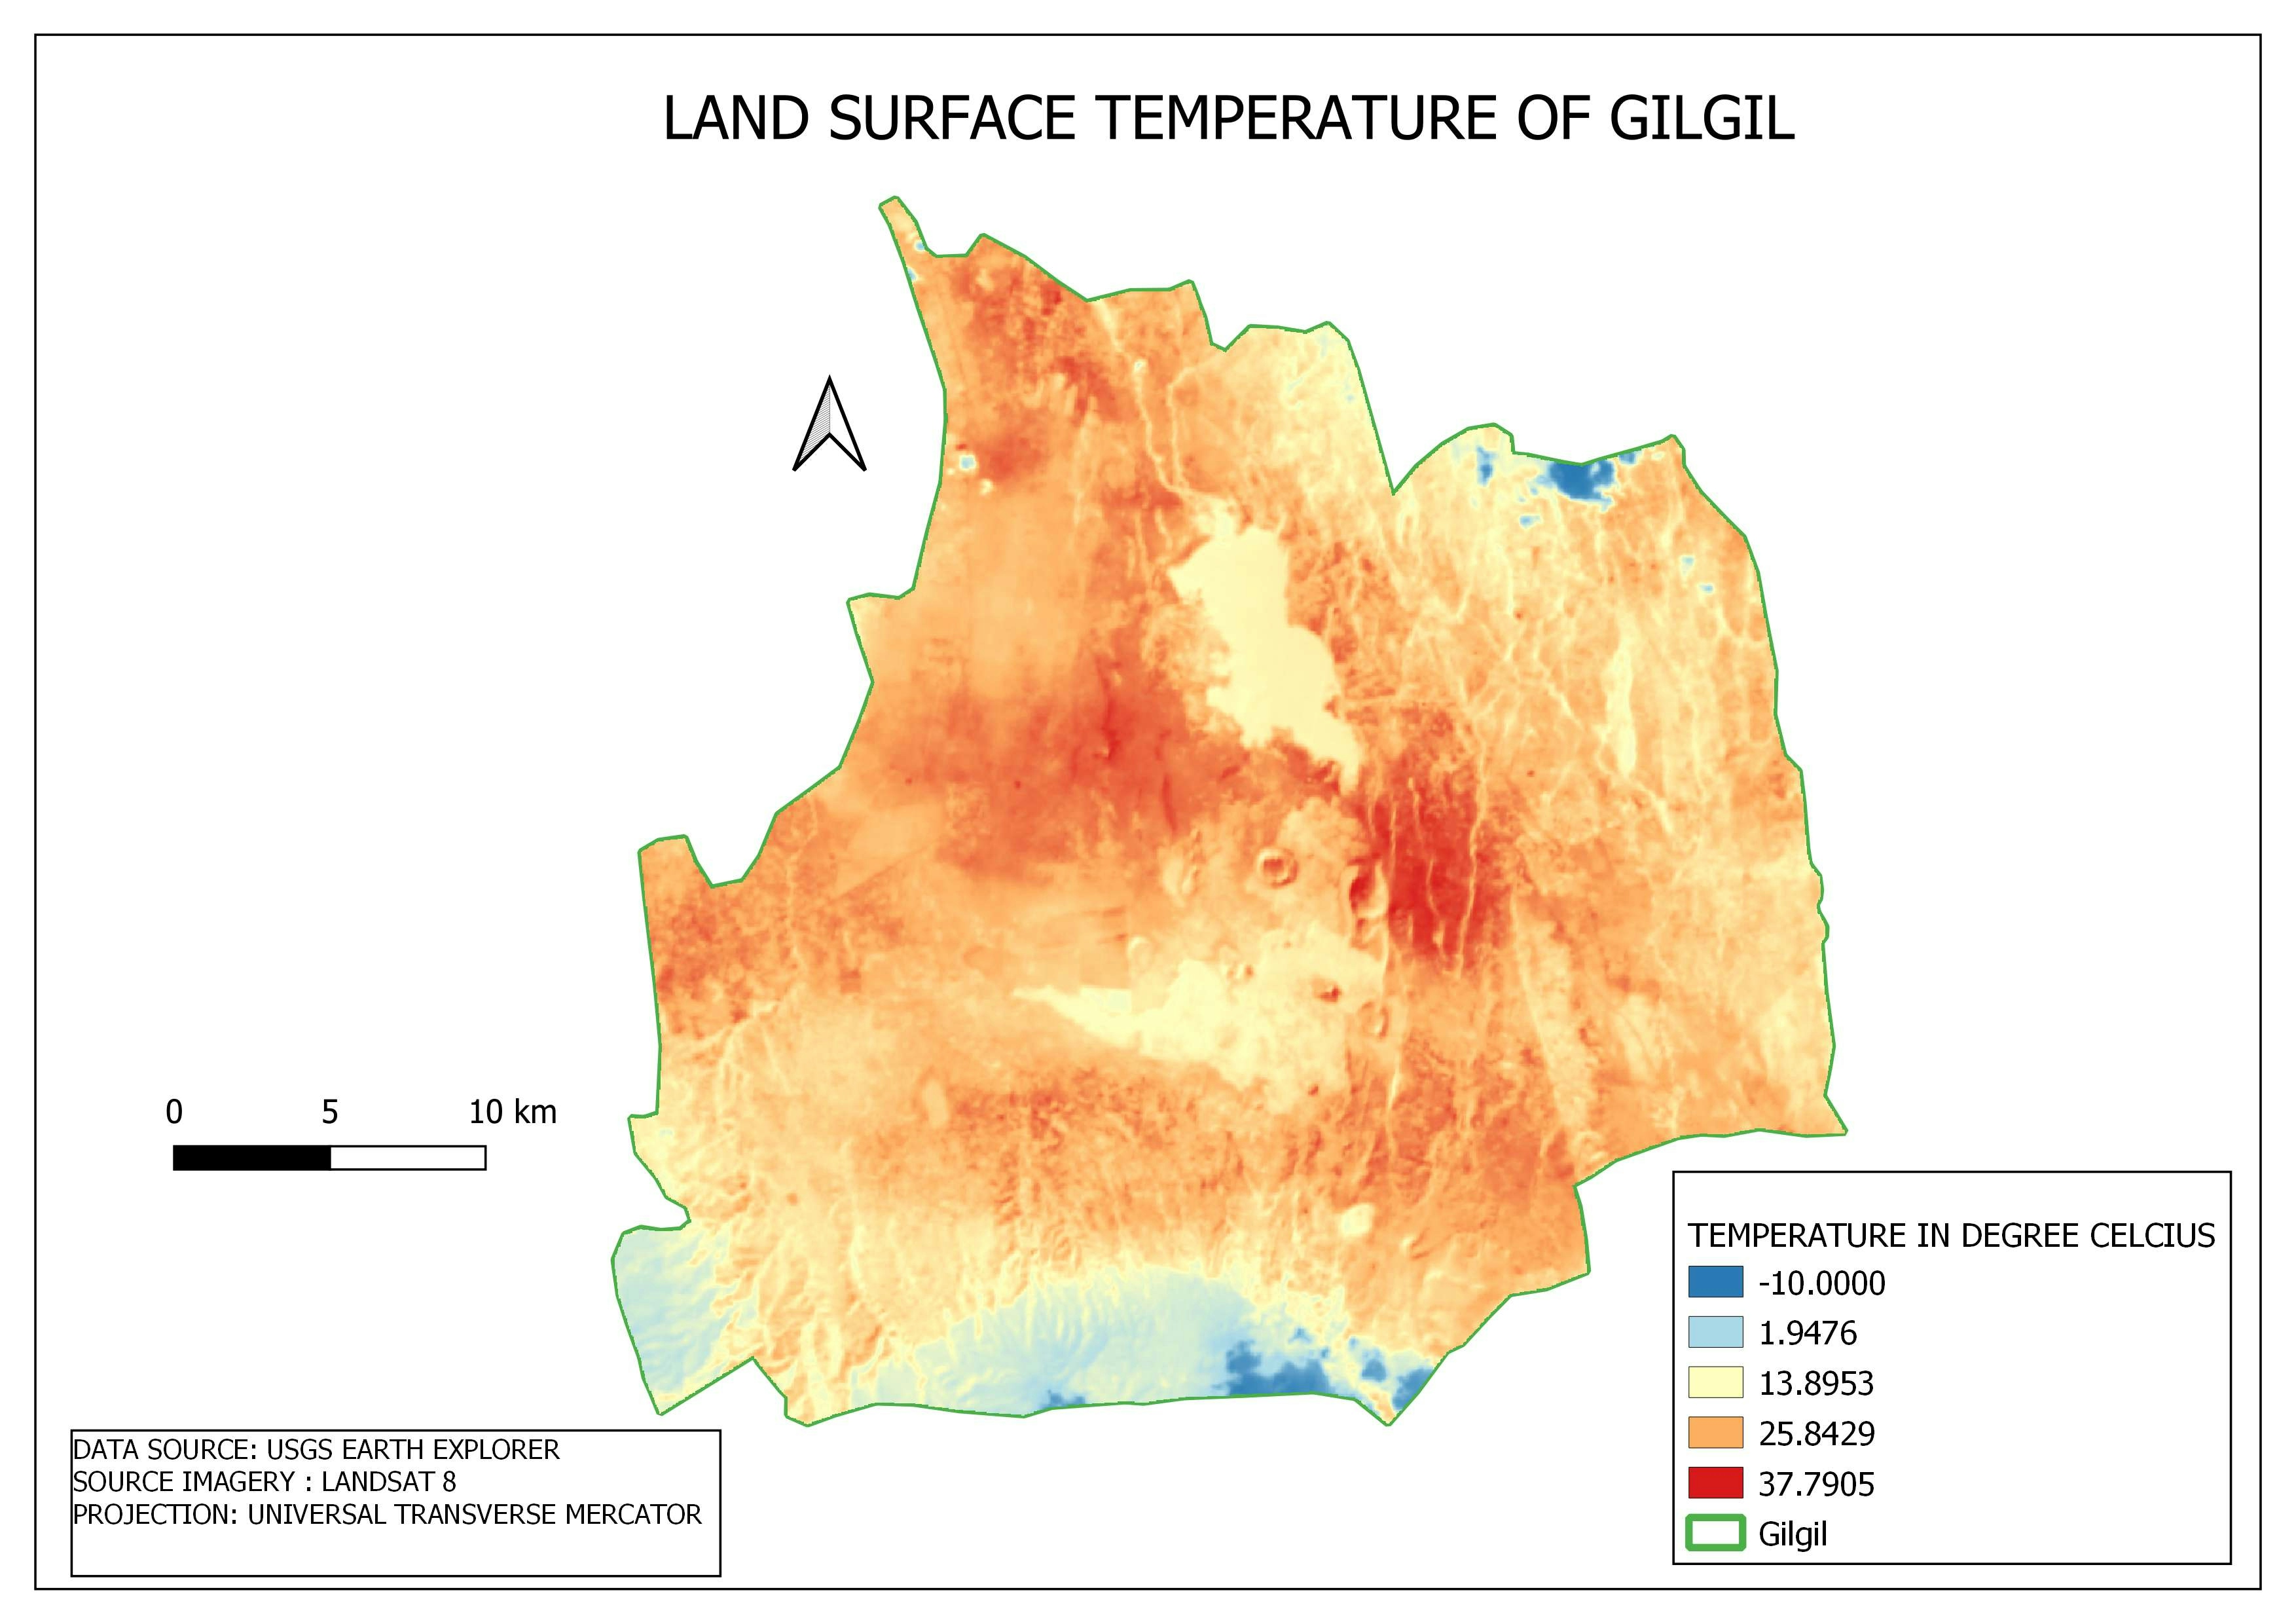 LAND SURFACE TEMPERATURE MAP FOR GILGIL